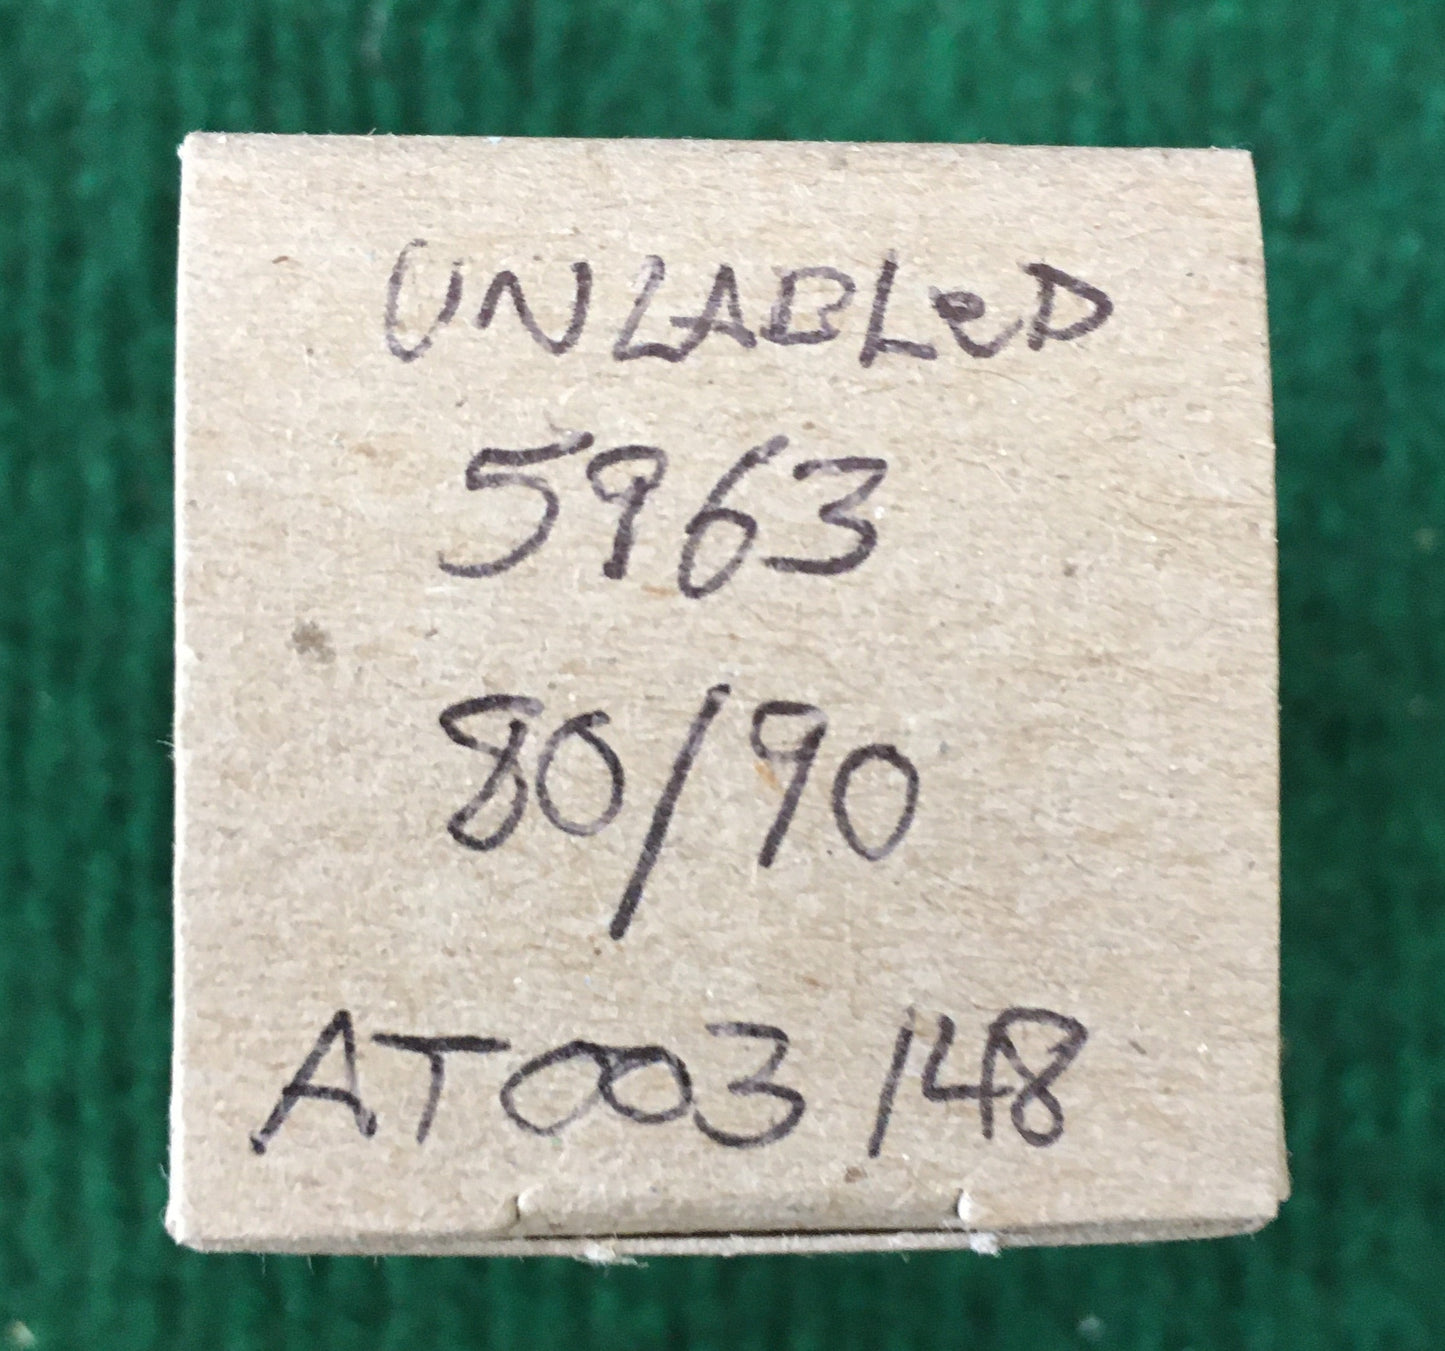 Unlabled * 5963 Tube * Tested 80/90